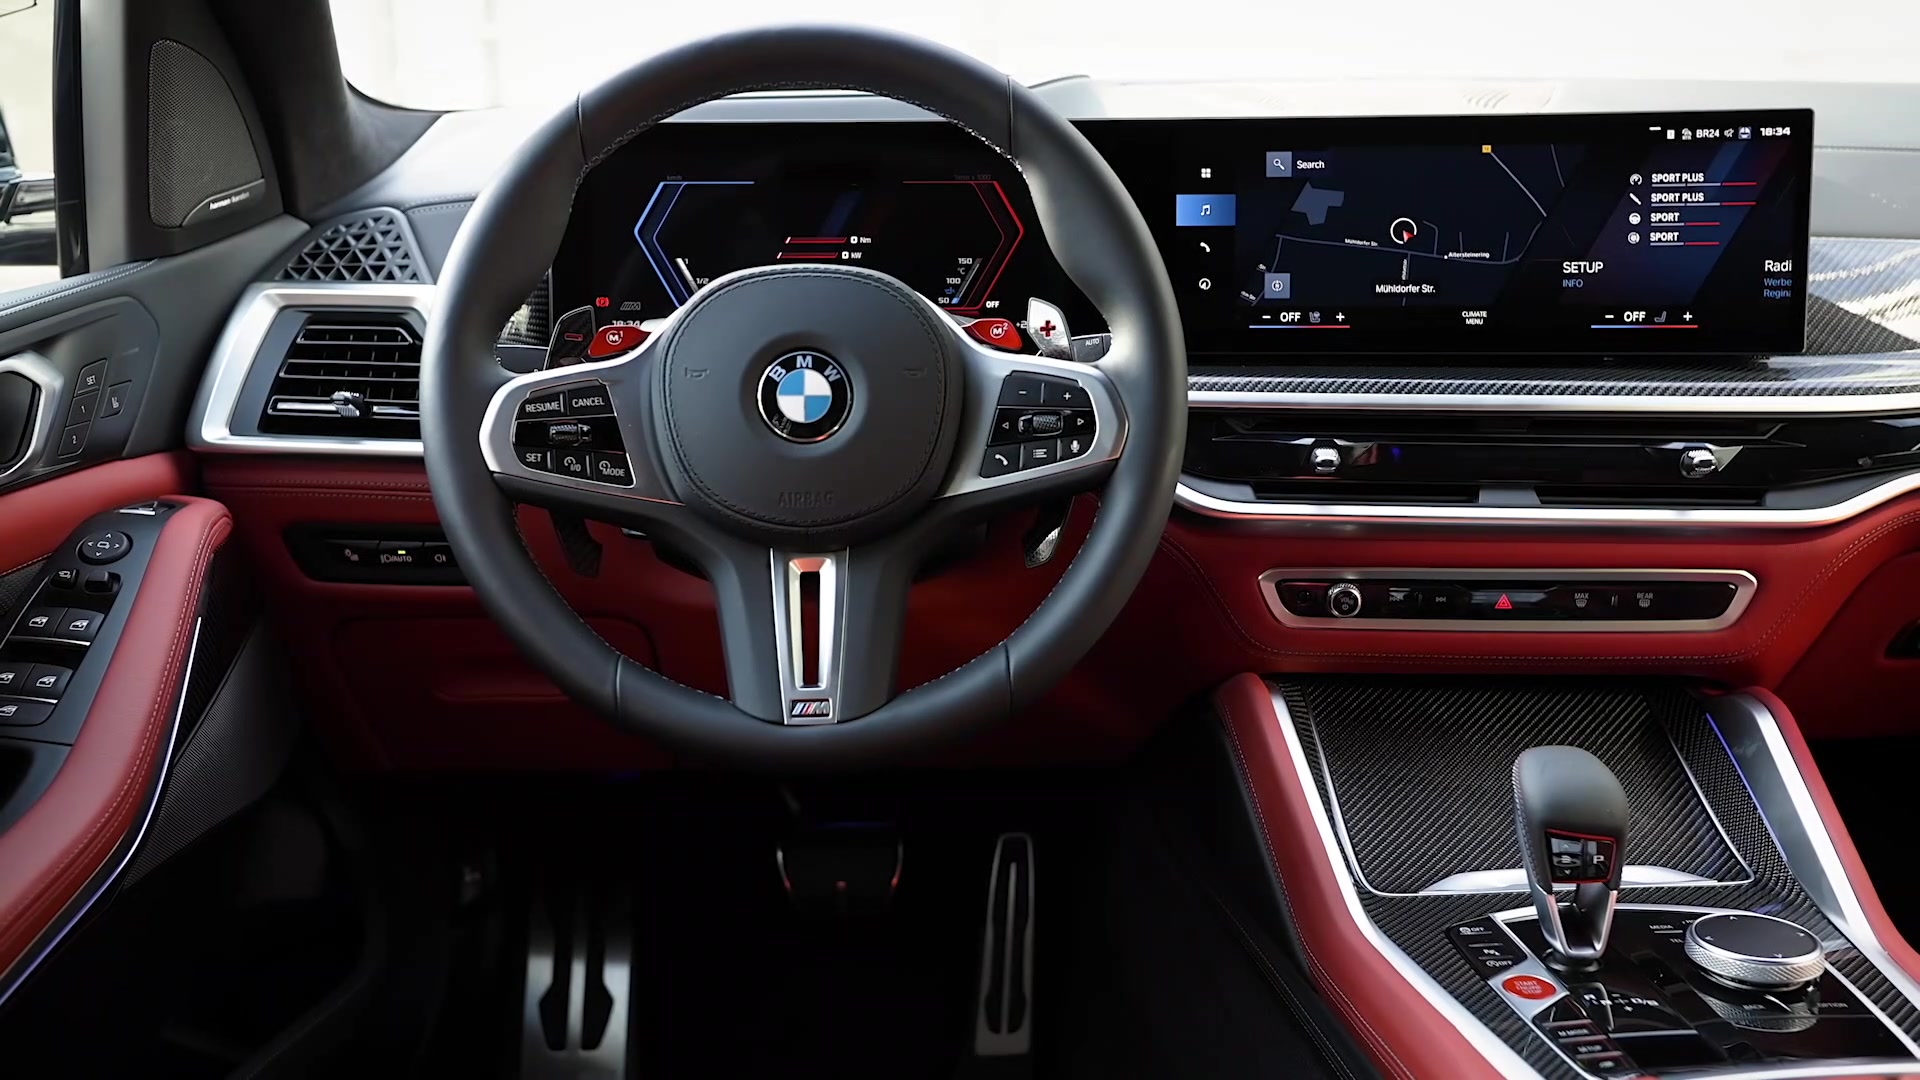 The new BMW X5M Competition Interior Design